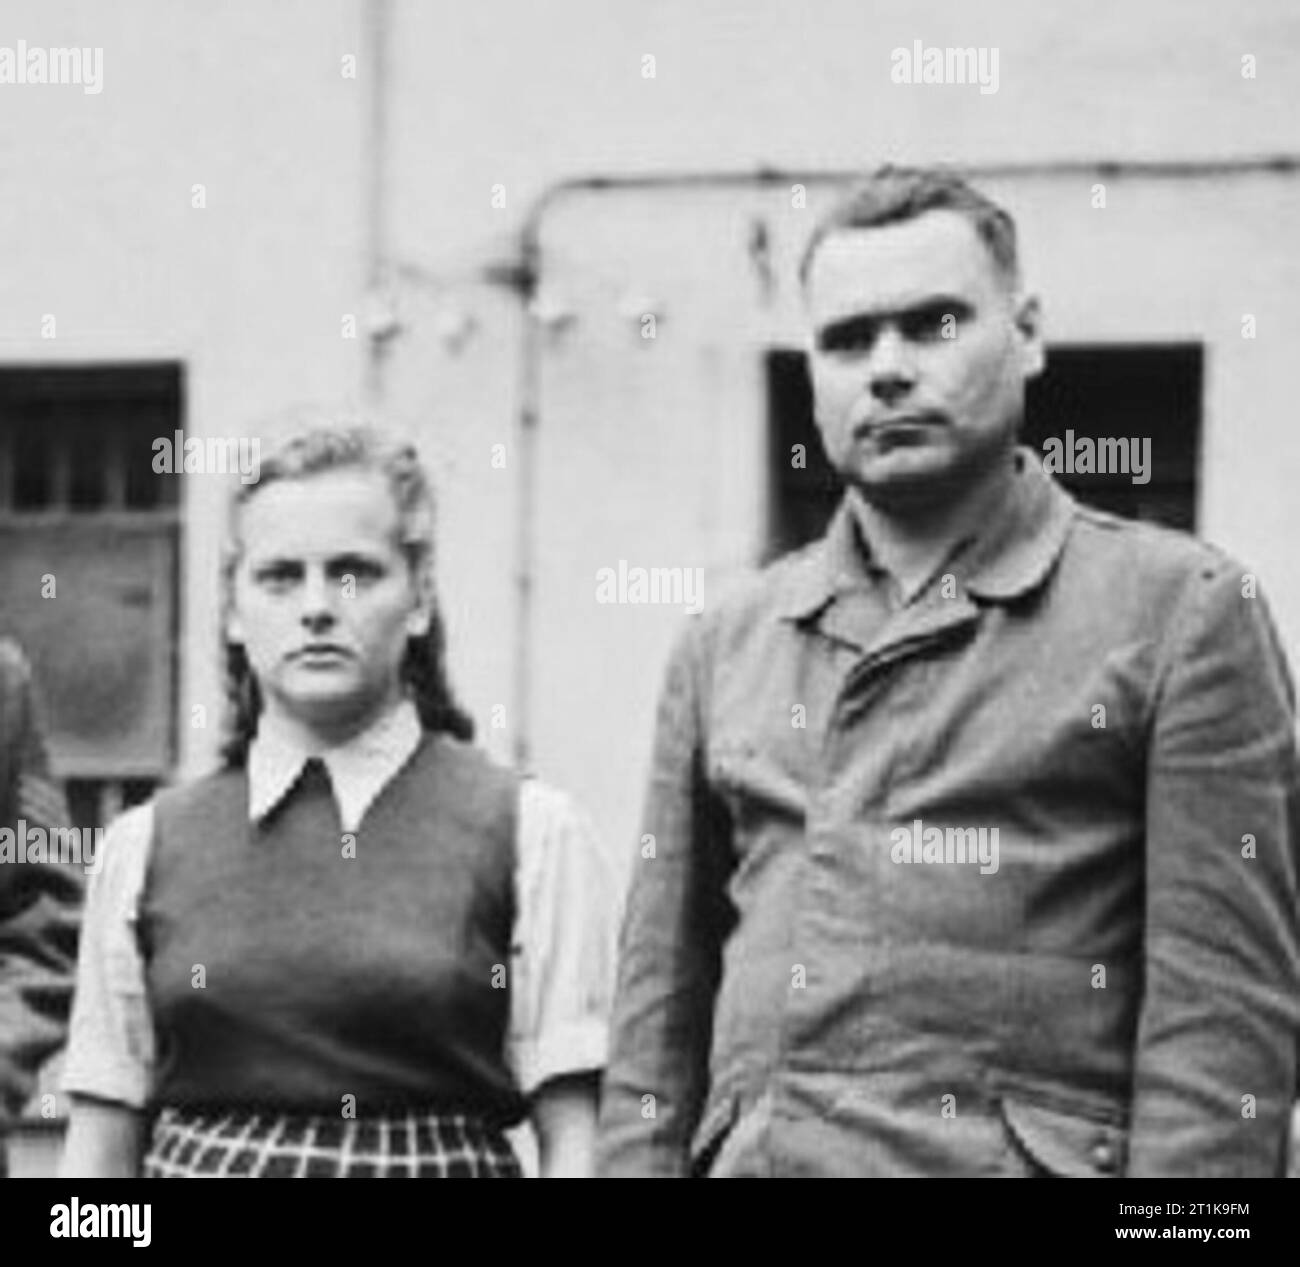 The Liberation of w:Bergen-Belsen concentration camp 1945 - Portraits of Belsen Guards at Celle Awaiting Trial, August 1945 w:Irma Grese standing in the courtyard of the Prisoner of War cage at Celle with w:Josef Kramer. Both were convicted of war crimes and sentenced to death. Stock Photo